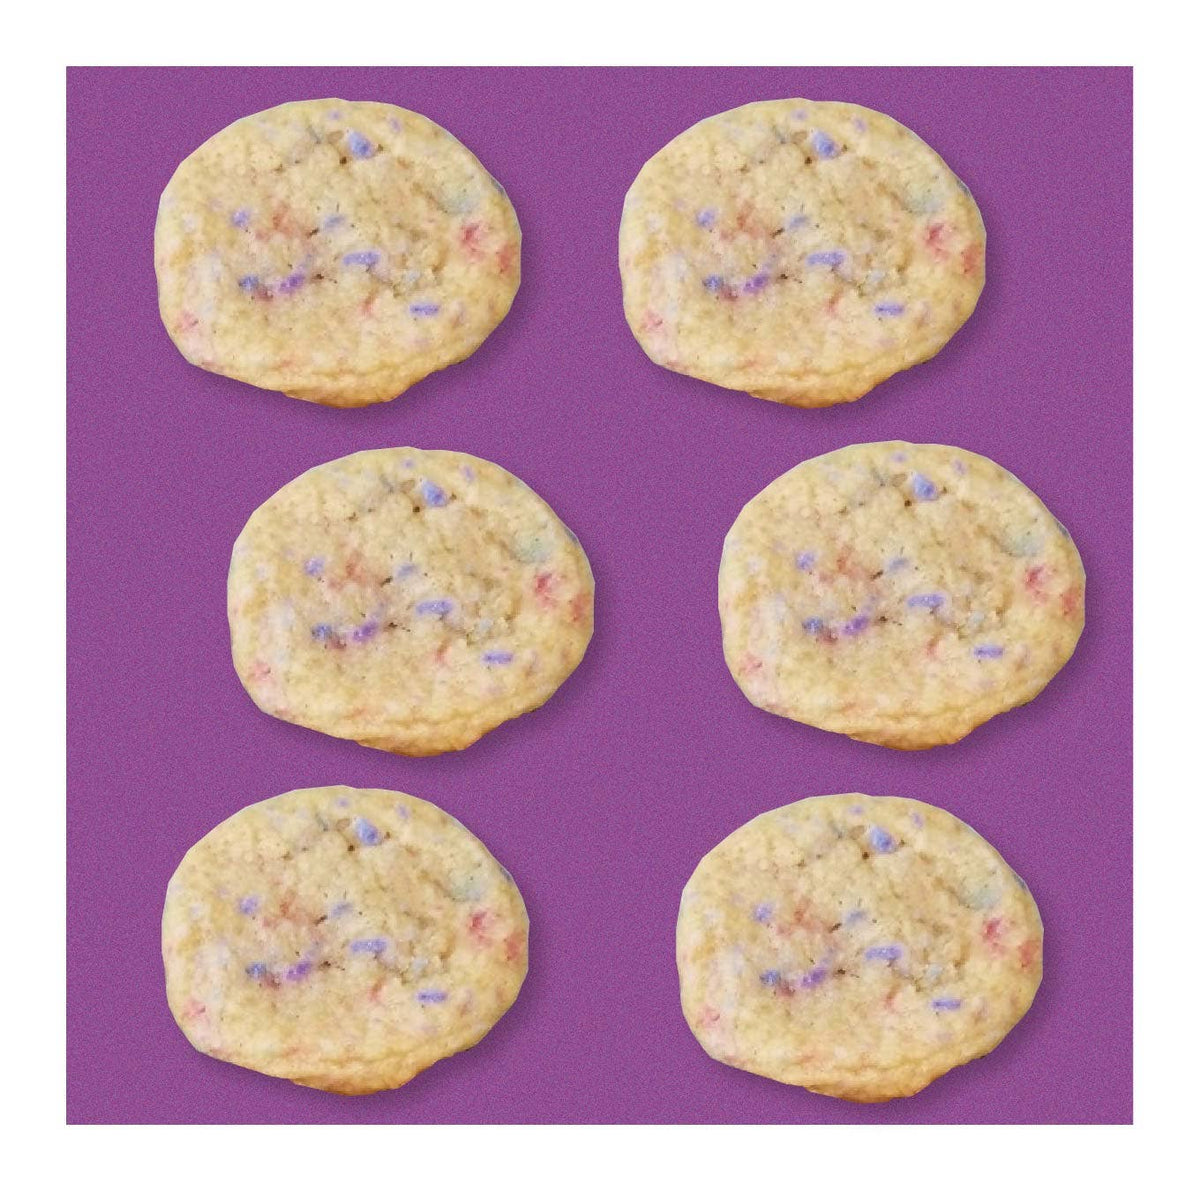 Be a Mermaid, Make Waves! Cotton Candy Cookie Mix